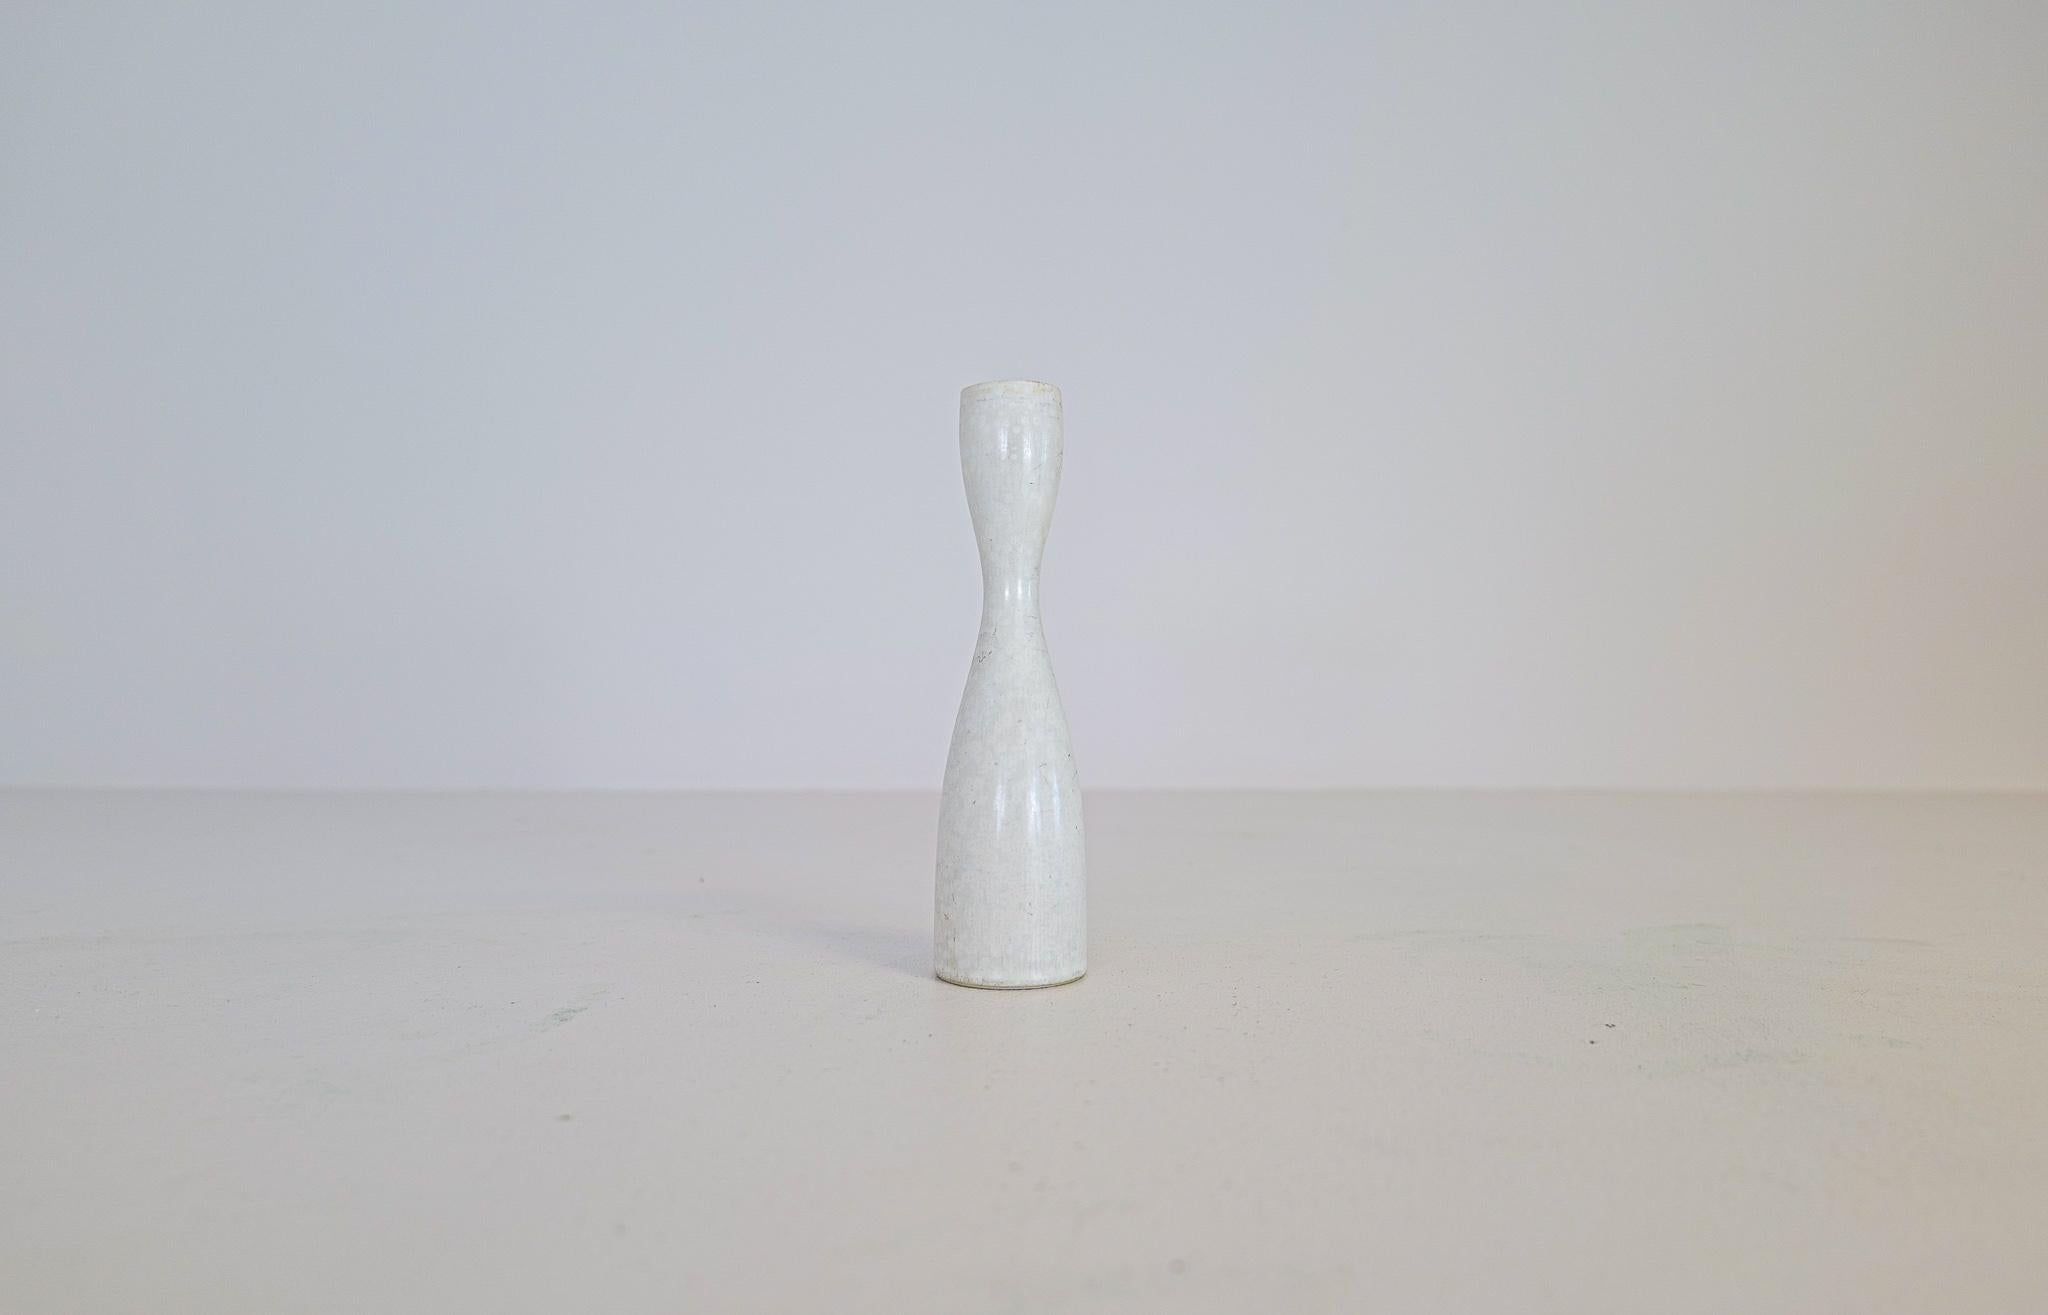 This vase from Rörstrand and maker or designer Carl Harry Stålhane, was made in Sweden in the midcentury. Its beautiful eggshell glazed combined with its incredible forms makes this an exceptional good piece.

Very good vintage condition. Black